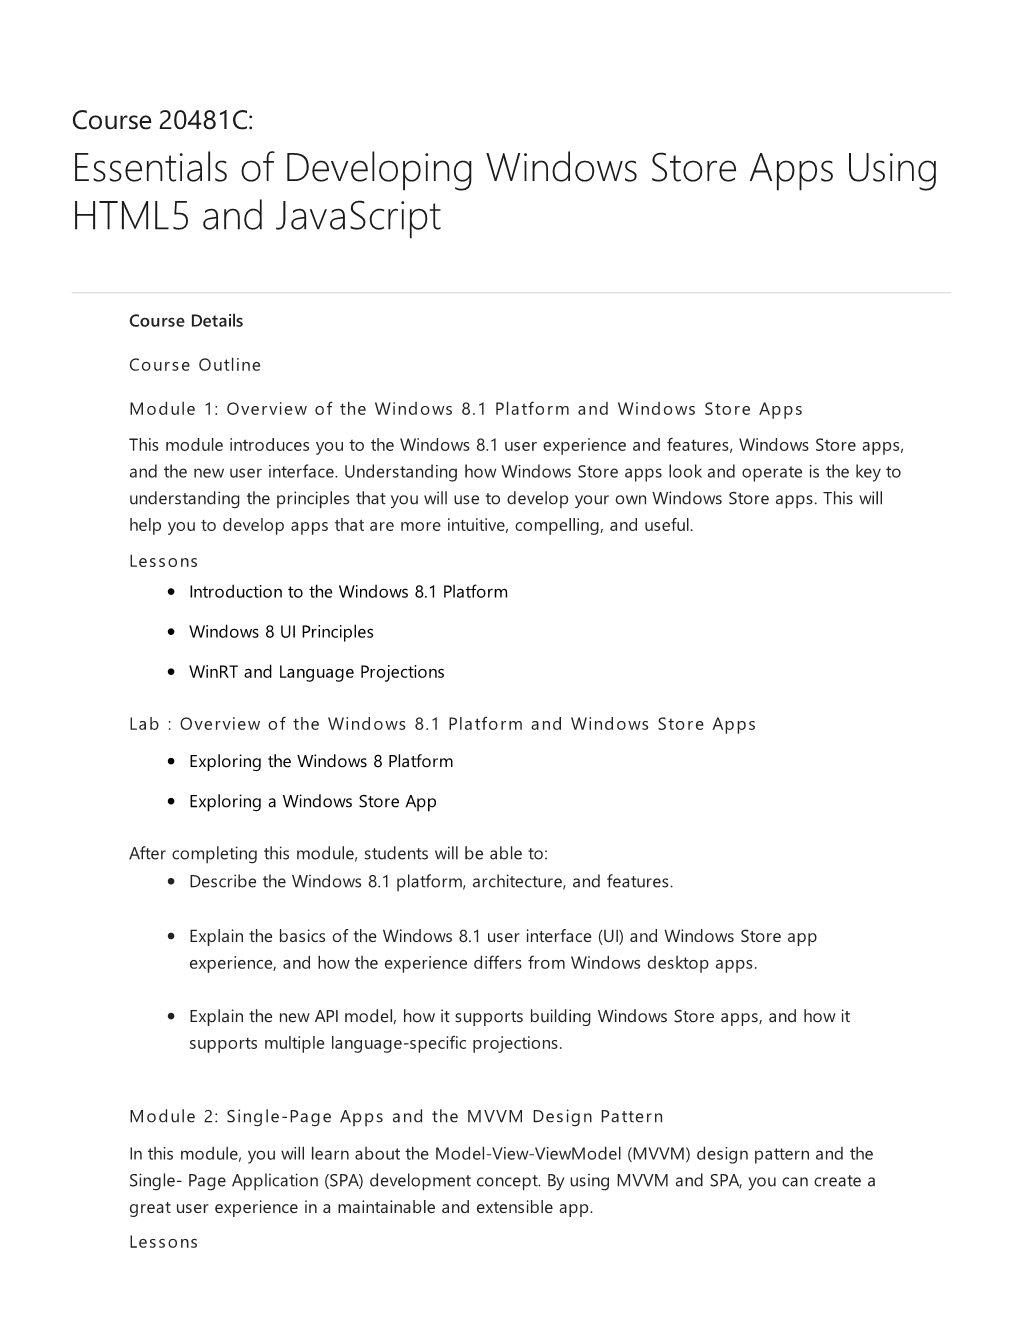 Essentials of Developing Windows Store Apps Using HTML5 and Javascript